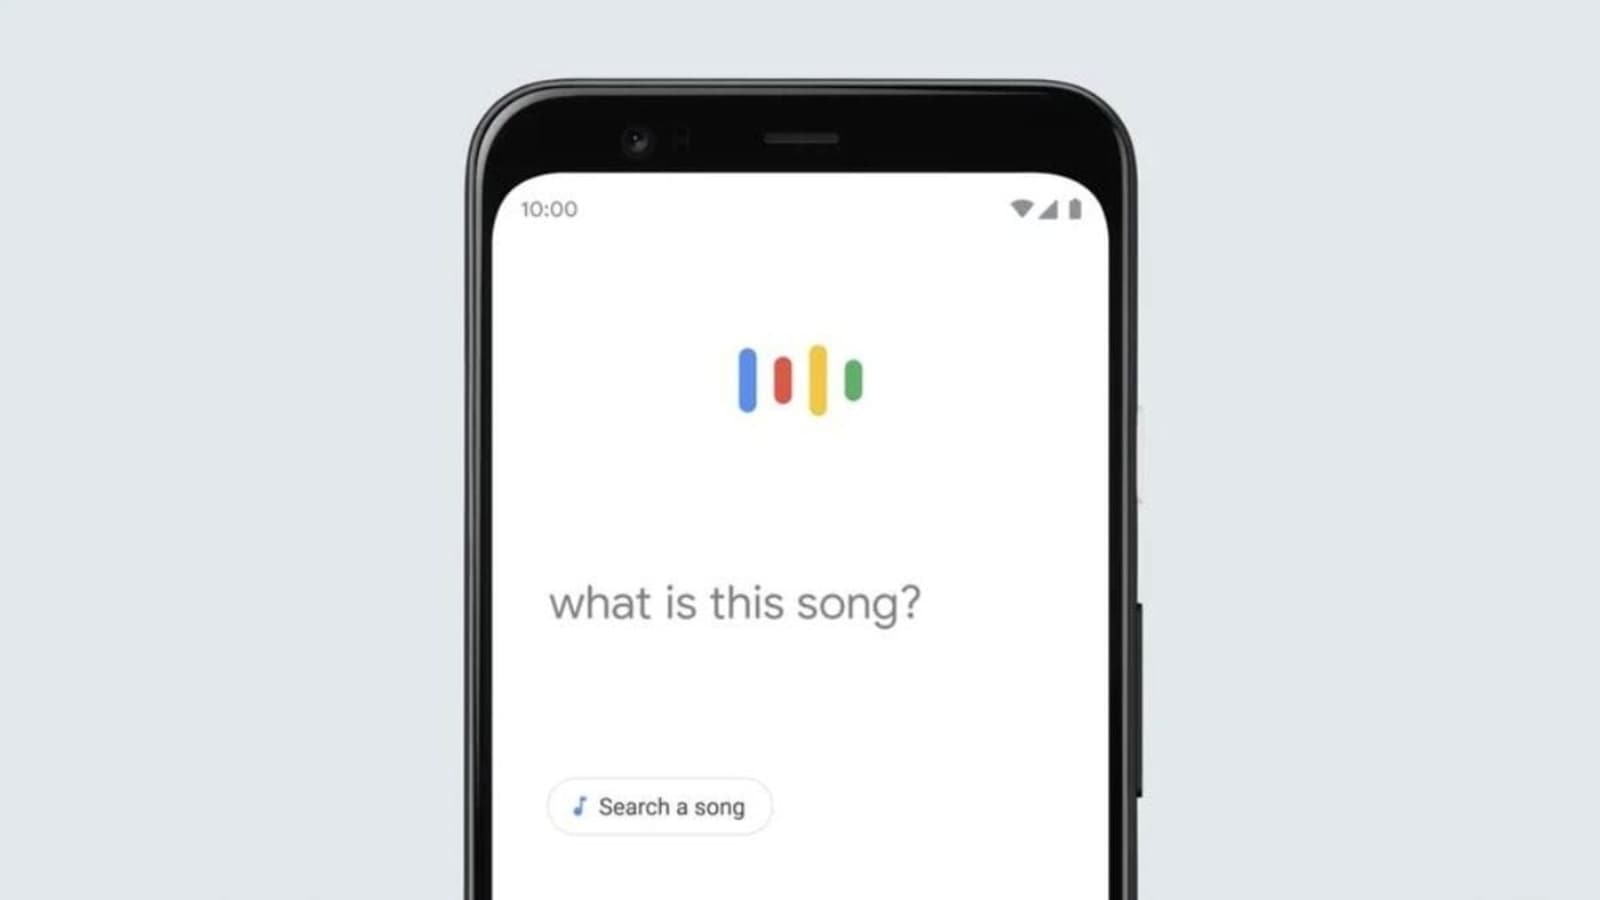 Google Kills 17 Assistant Features Ahead of 'Assistant with Bard' Release